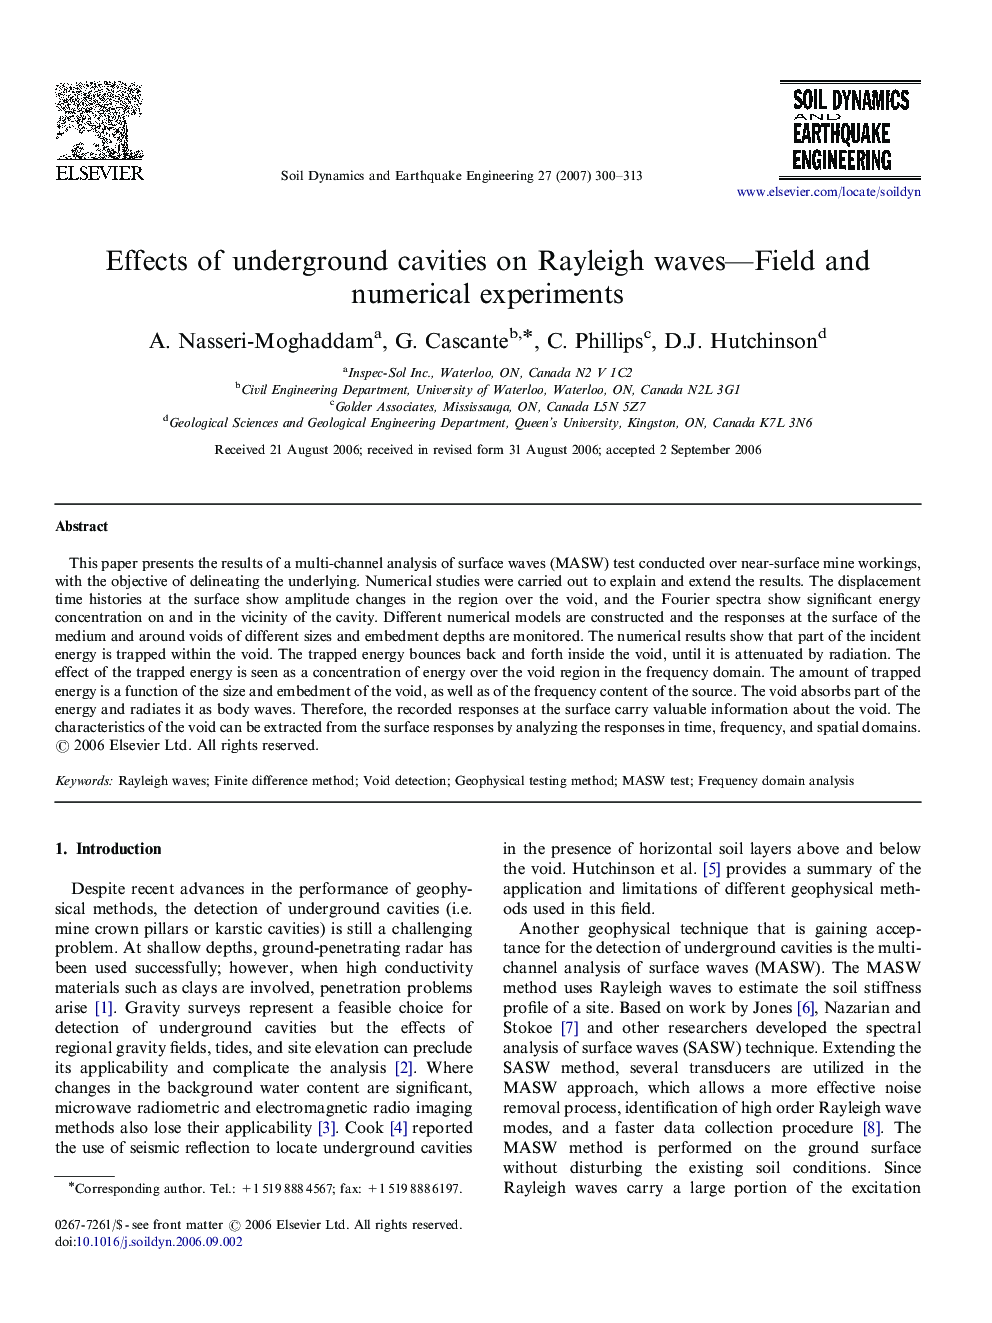 Effects of underground cavities on Rayleigh waves—Field and numerical experiments